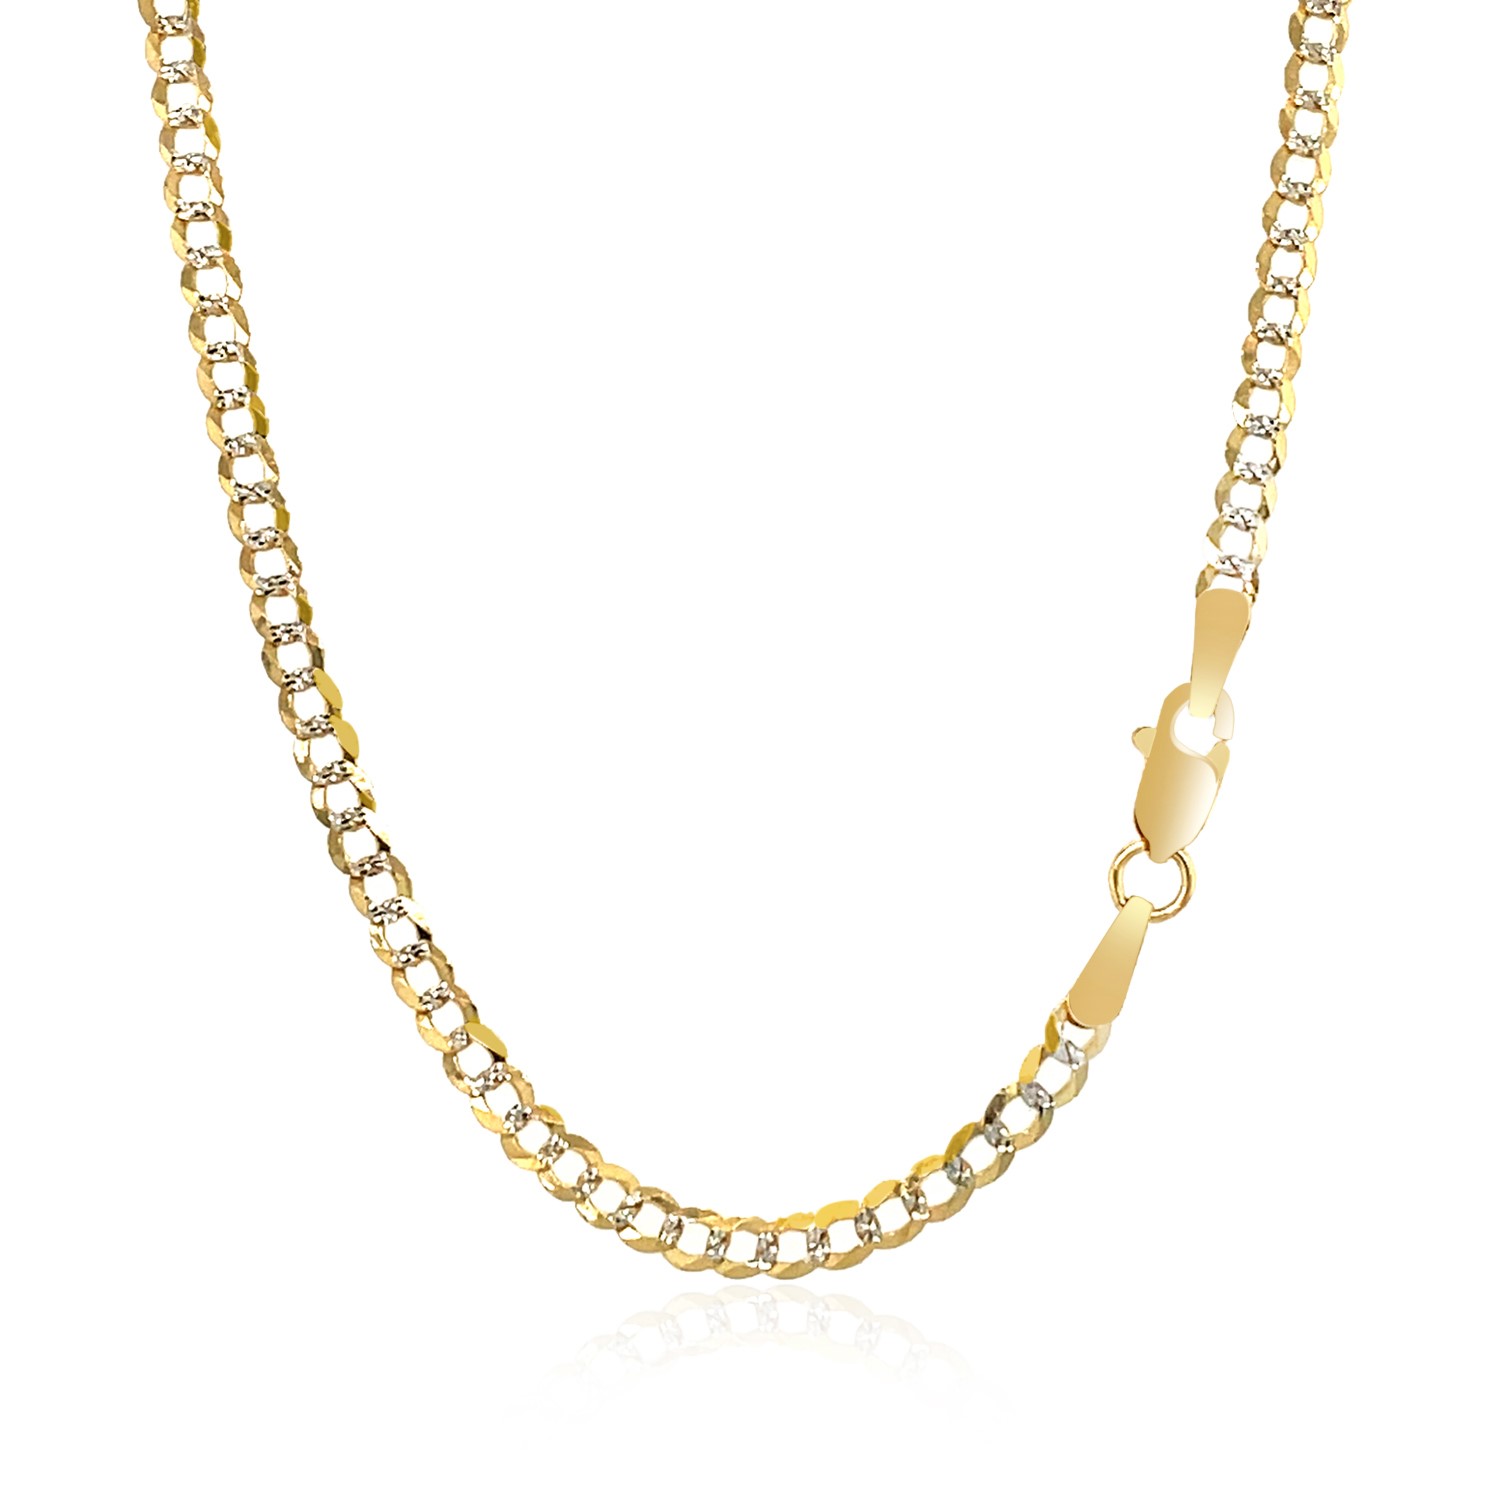 2.6 mm 14k Two Tone Gold Pave Curb Chain